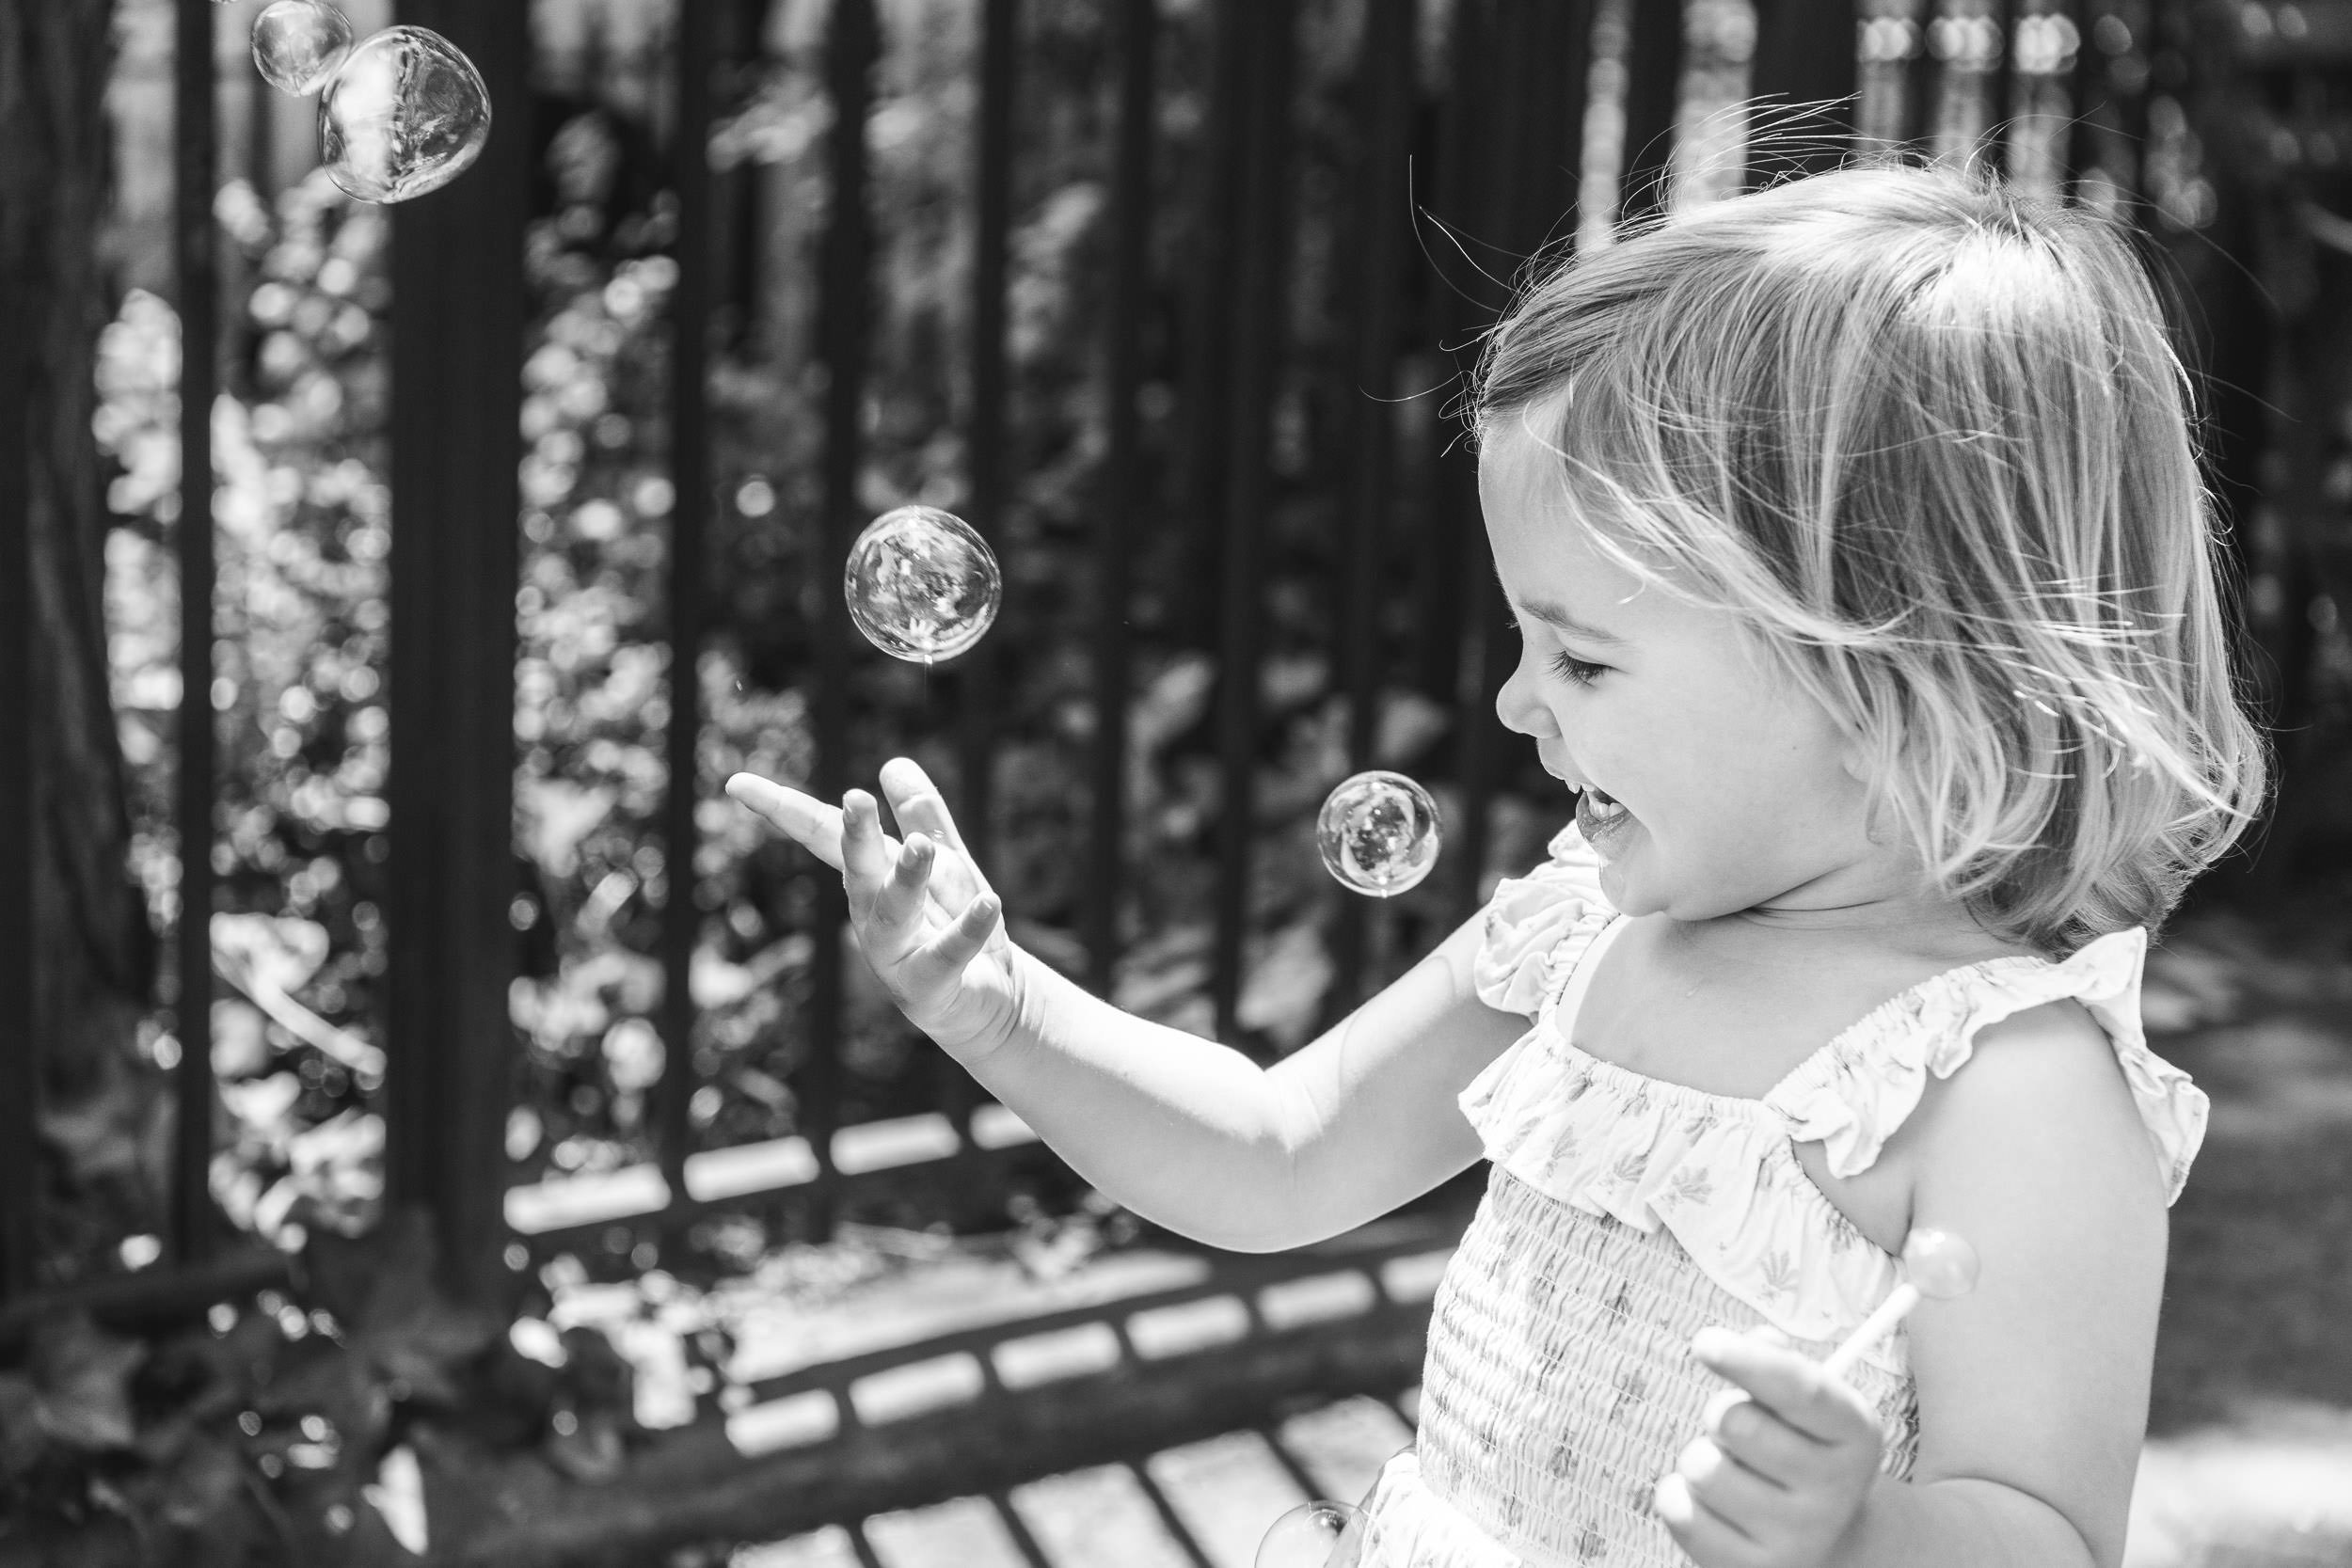  Black and white portrait of a little girl playing with bubbles by Nicole Hawkins Photography. lifestyle portraits #NicoleHawkinsPhotograaphy #NicoleHawkinsChildren #NewYorkPortraits #KidsinNewYork #ChildrensPortraits #lifestyleportraits 